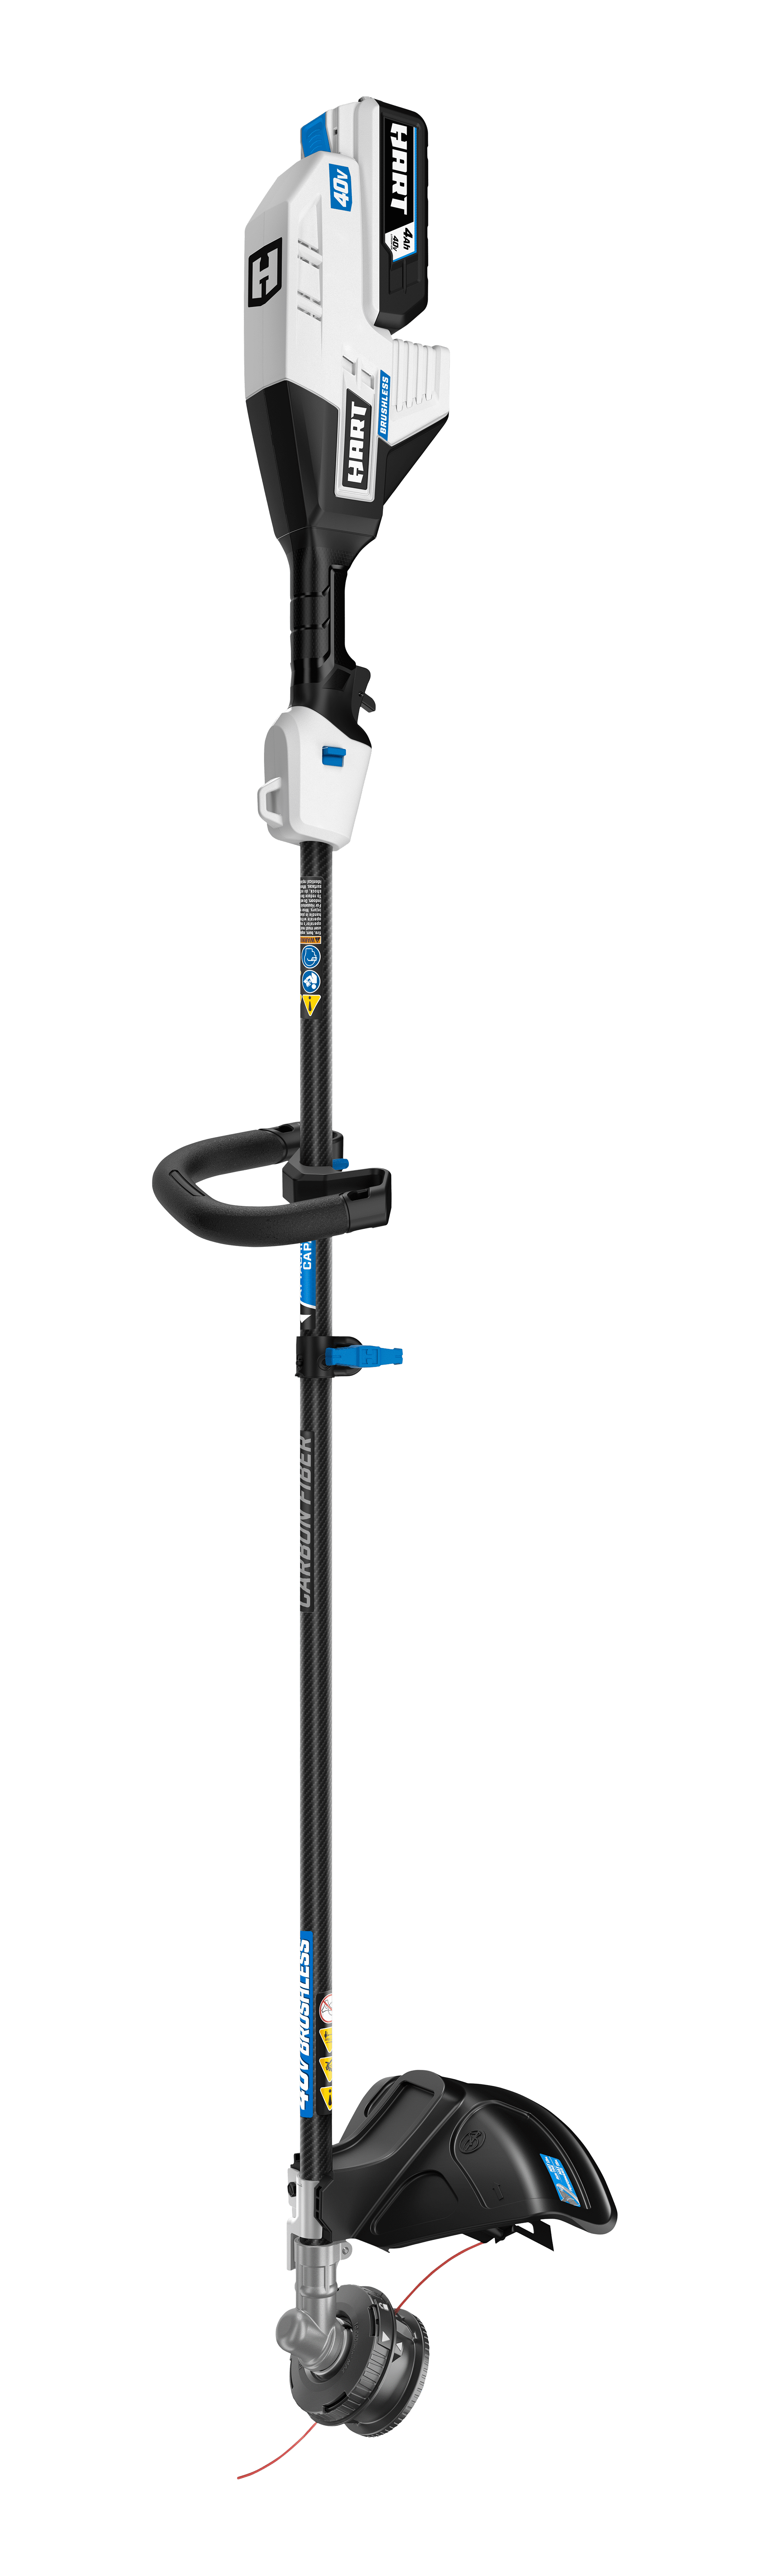 HART 40-Volt Cordless 15-inch SUPERCHARGE Brushless Carbon Fiber Attachment Capable String Trimmer (1) 4.0 Lithium-Ion Battery